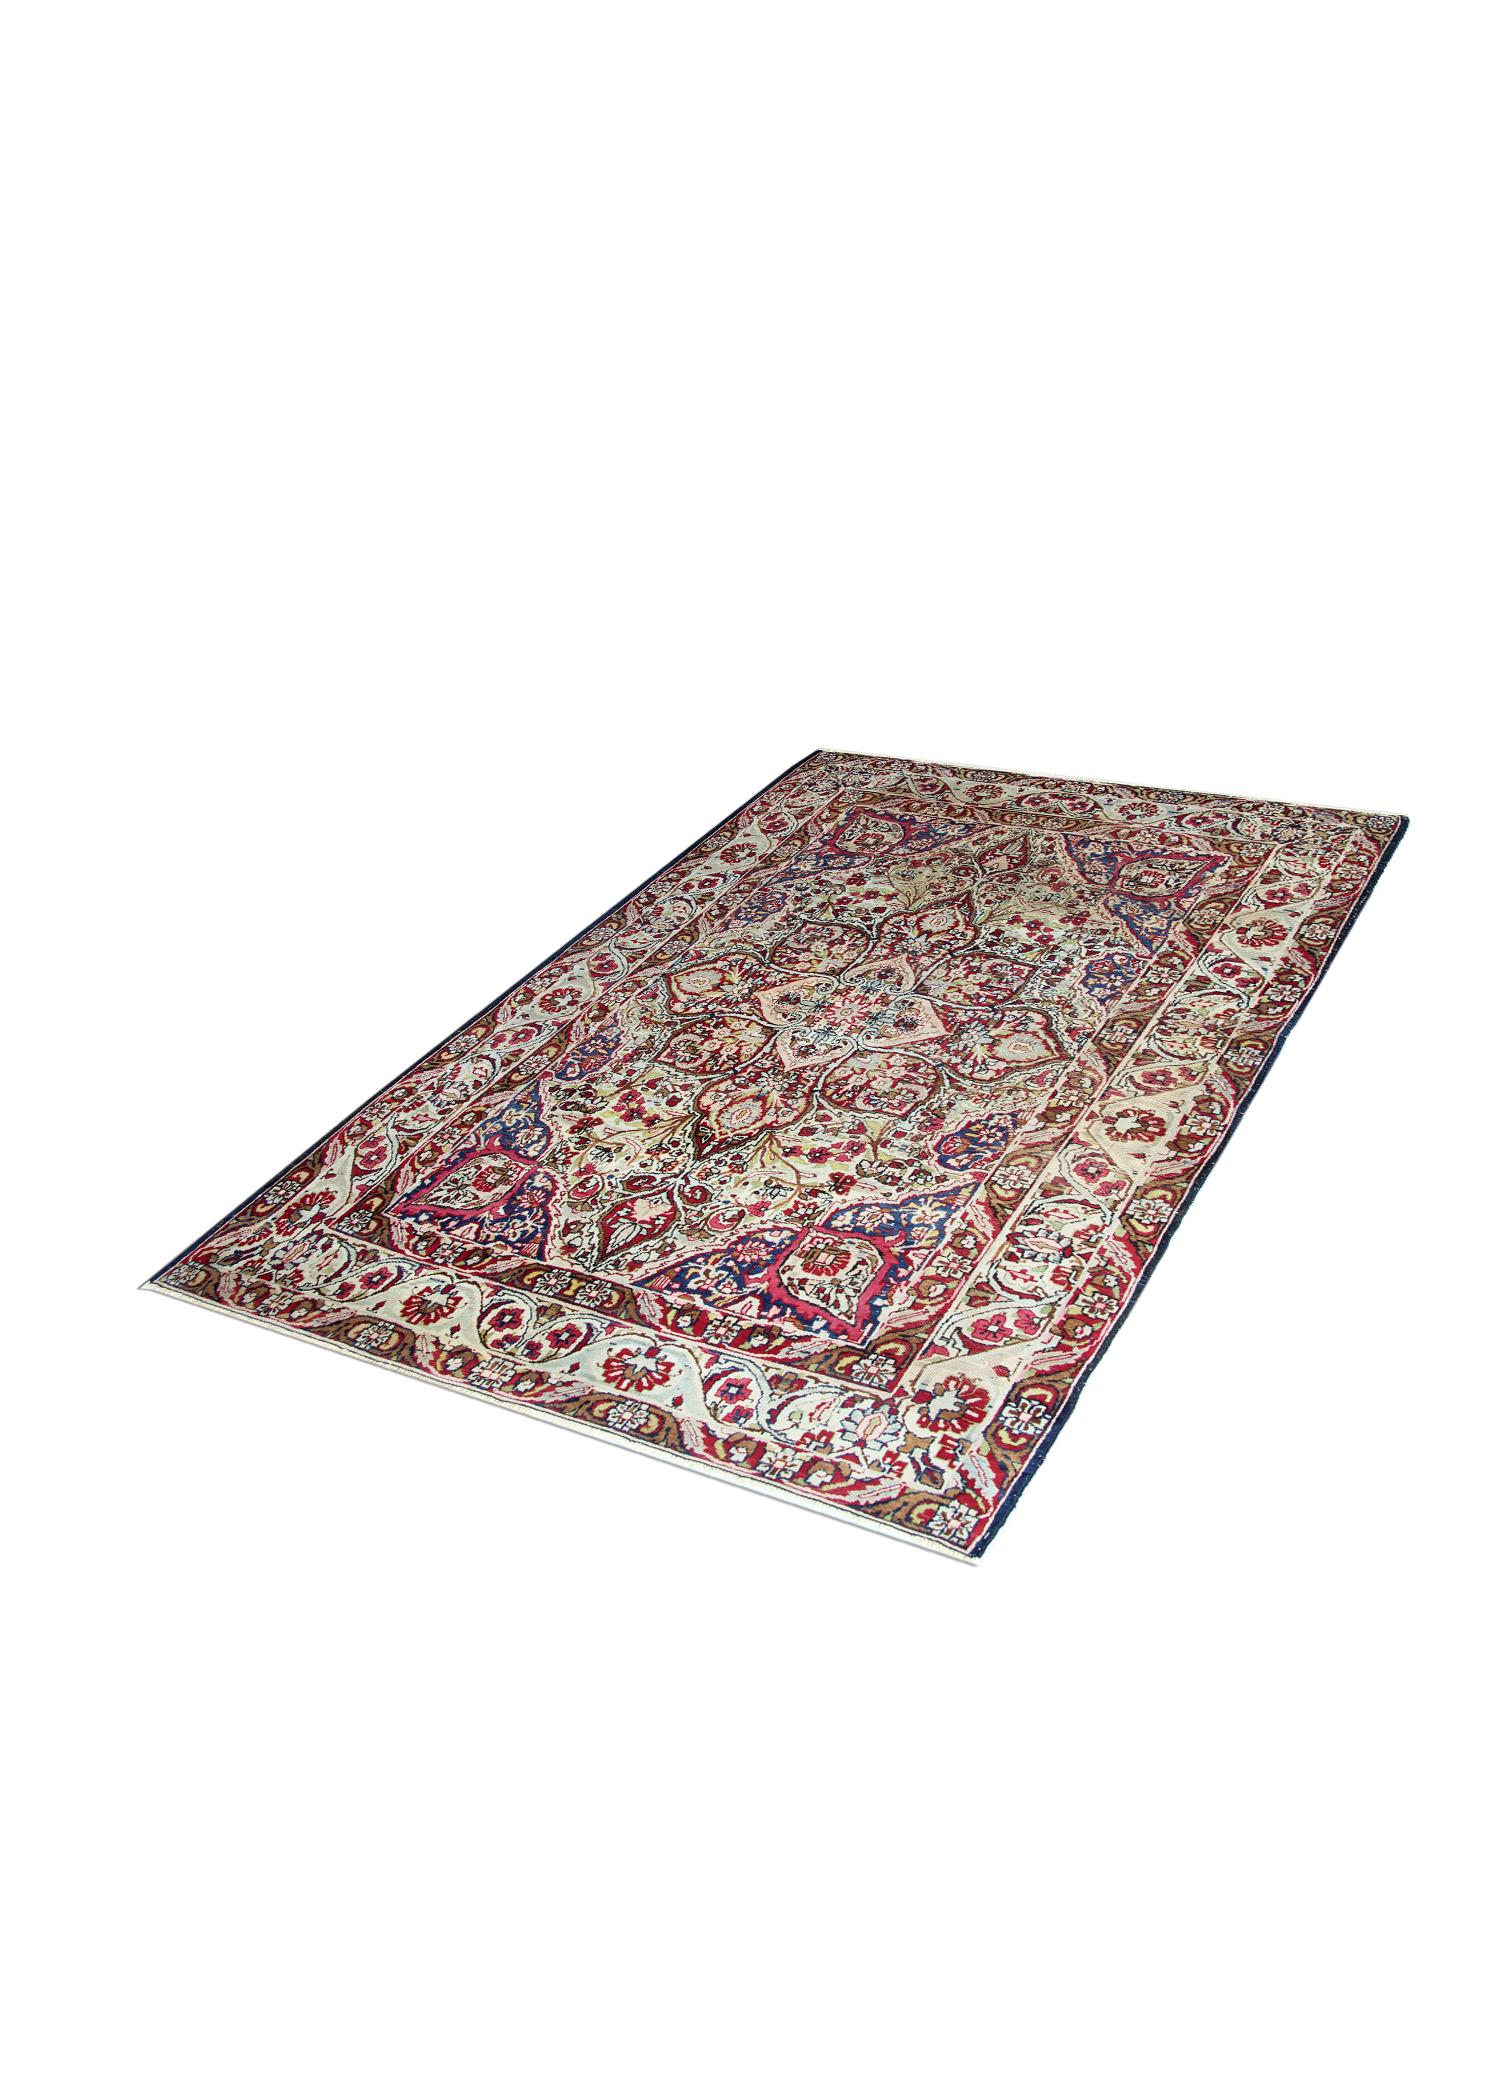 Early Victorian Antique Rugs Wool Oriental Rug Handmade Traditional Floral Carpet For Sale